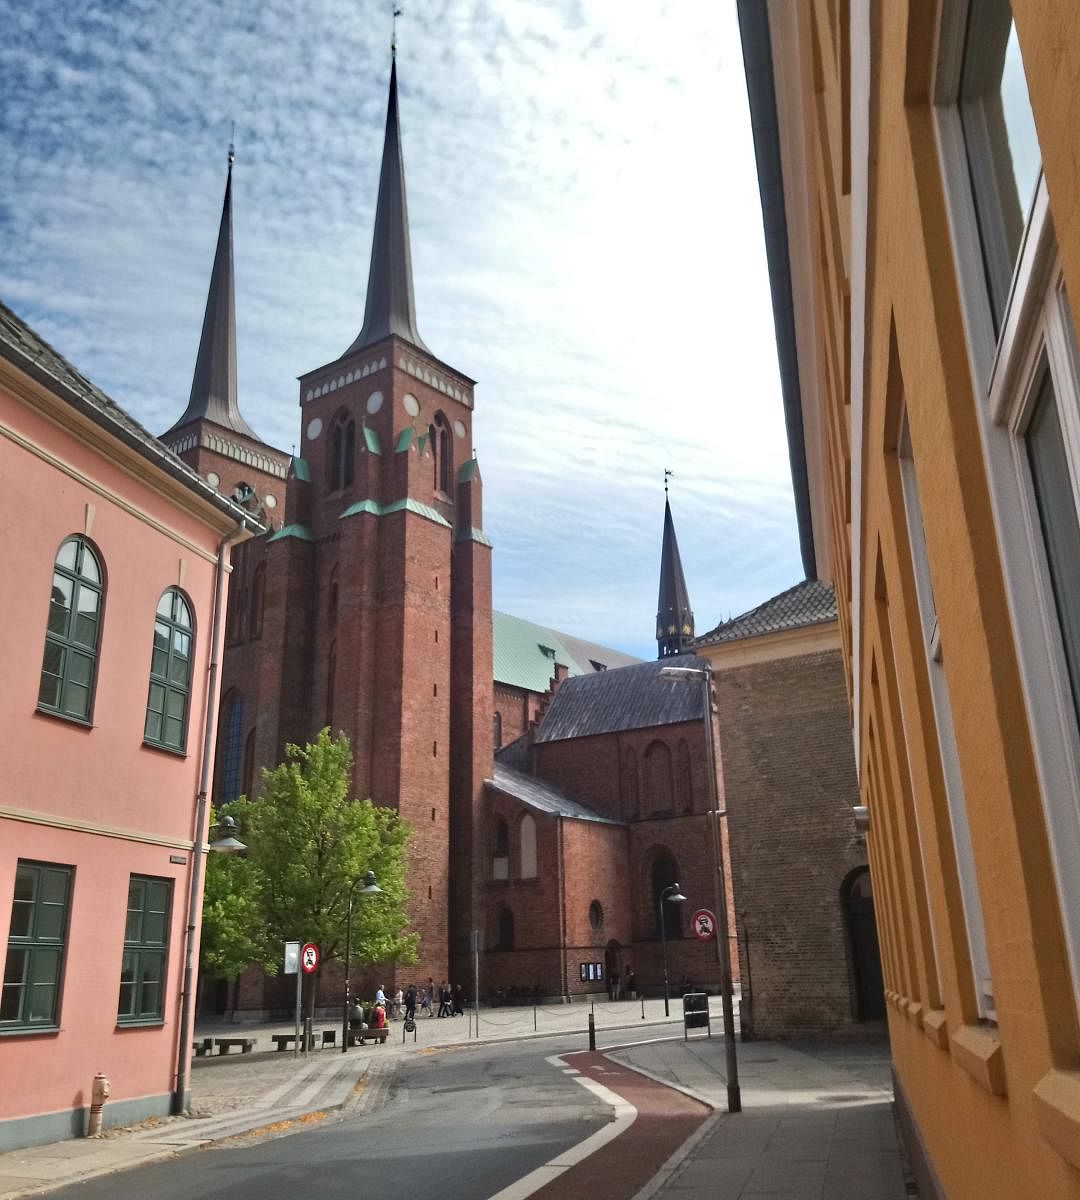 GOTHIC HERITAGE Roskilde Cathedral. PHOTOS BY AUTHOR